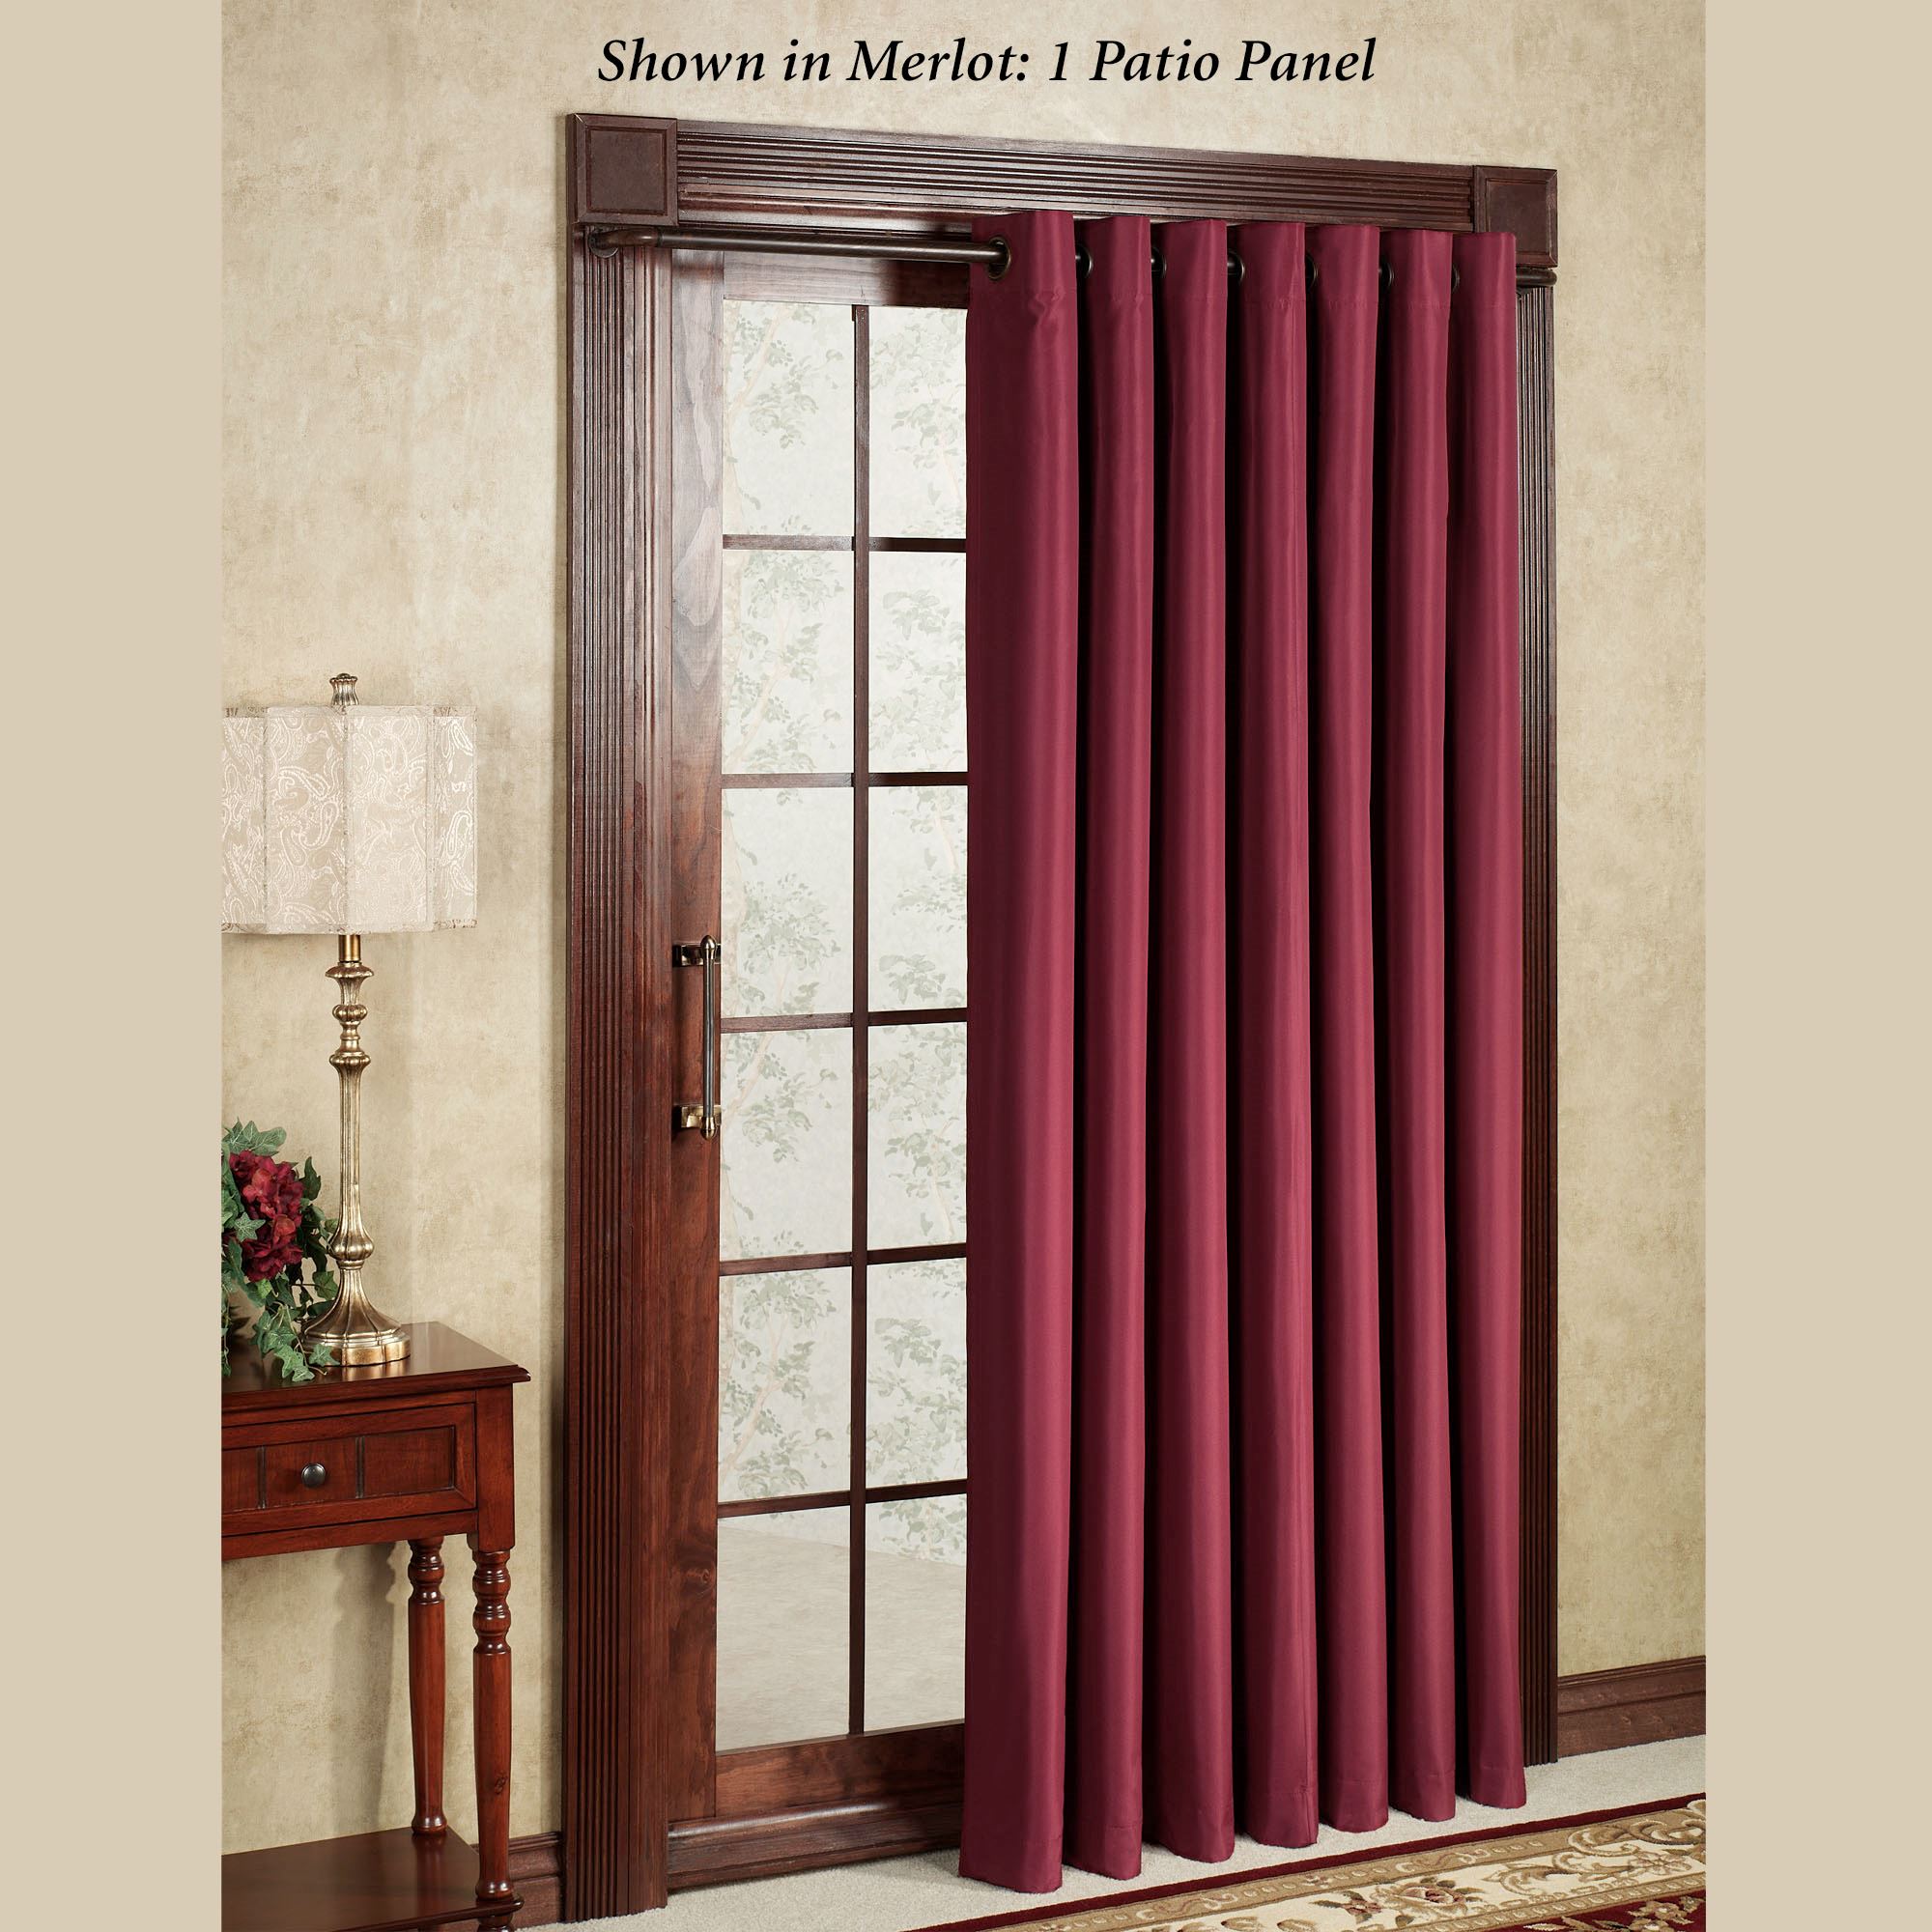 New Click to expand thermal door curtain